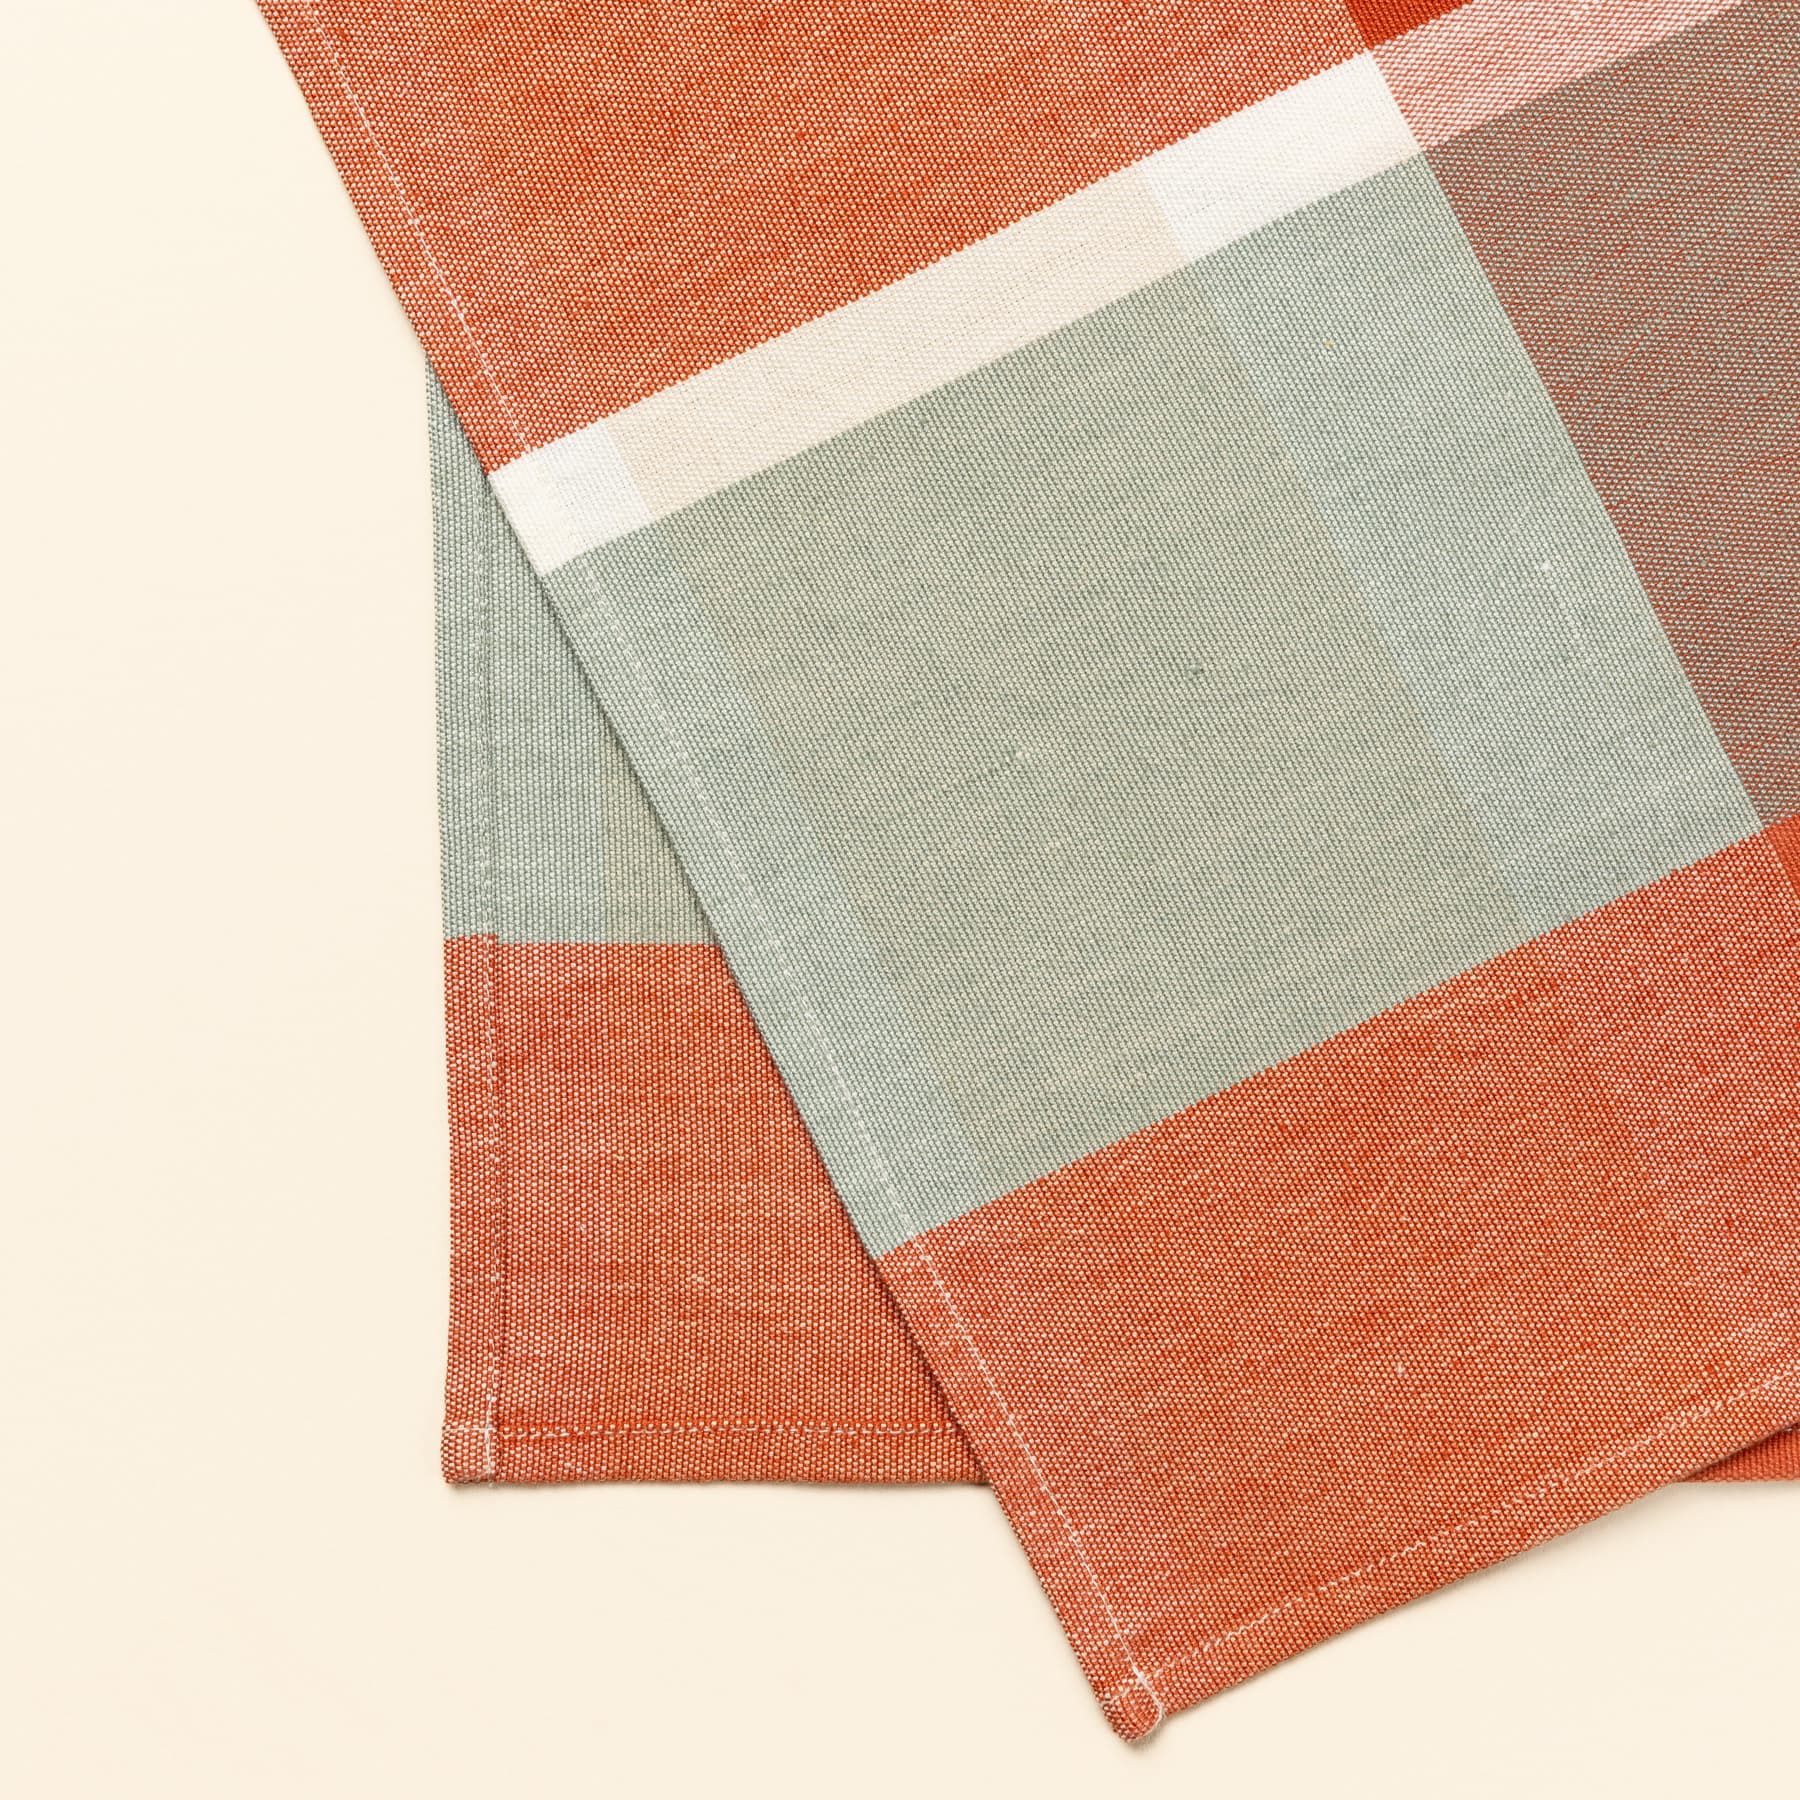 A close up of a corner of a gingham table runner featuring colors of sage green, bold orange, and cream.